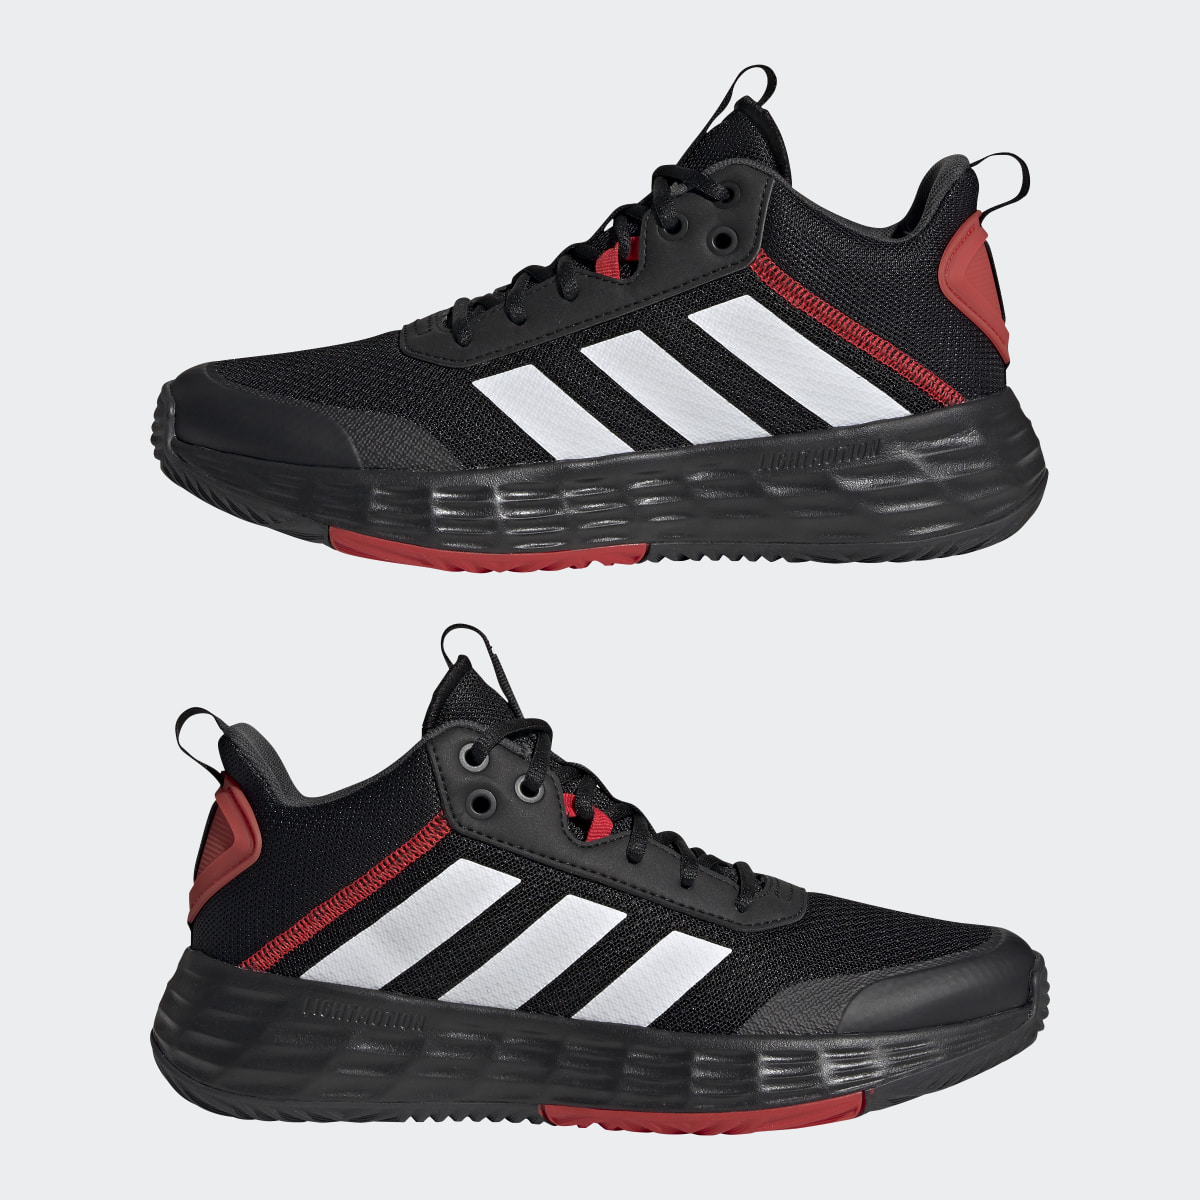 Adidas Chaussure Ownthegame. 8